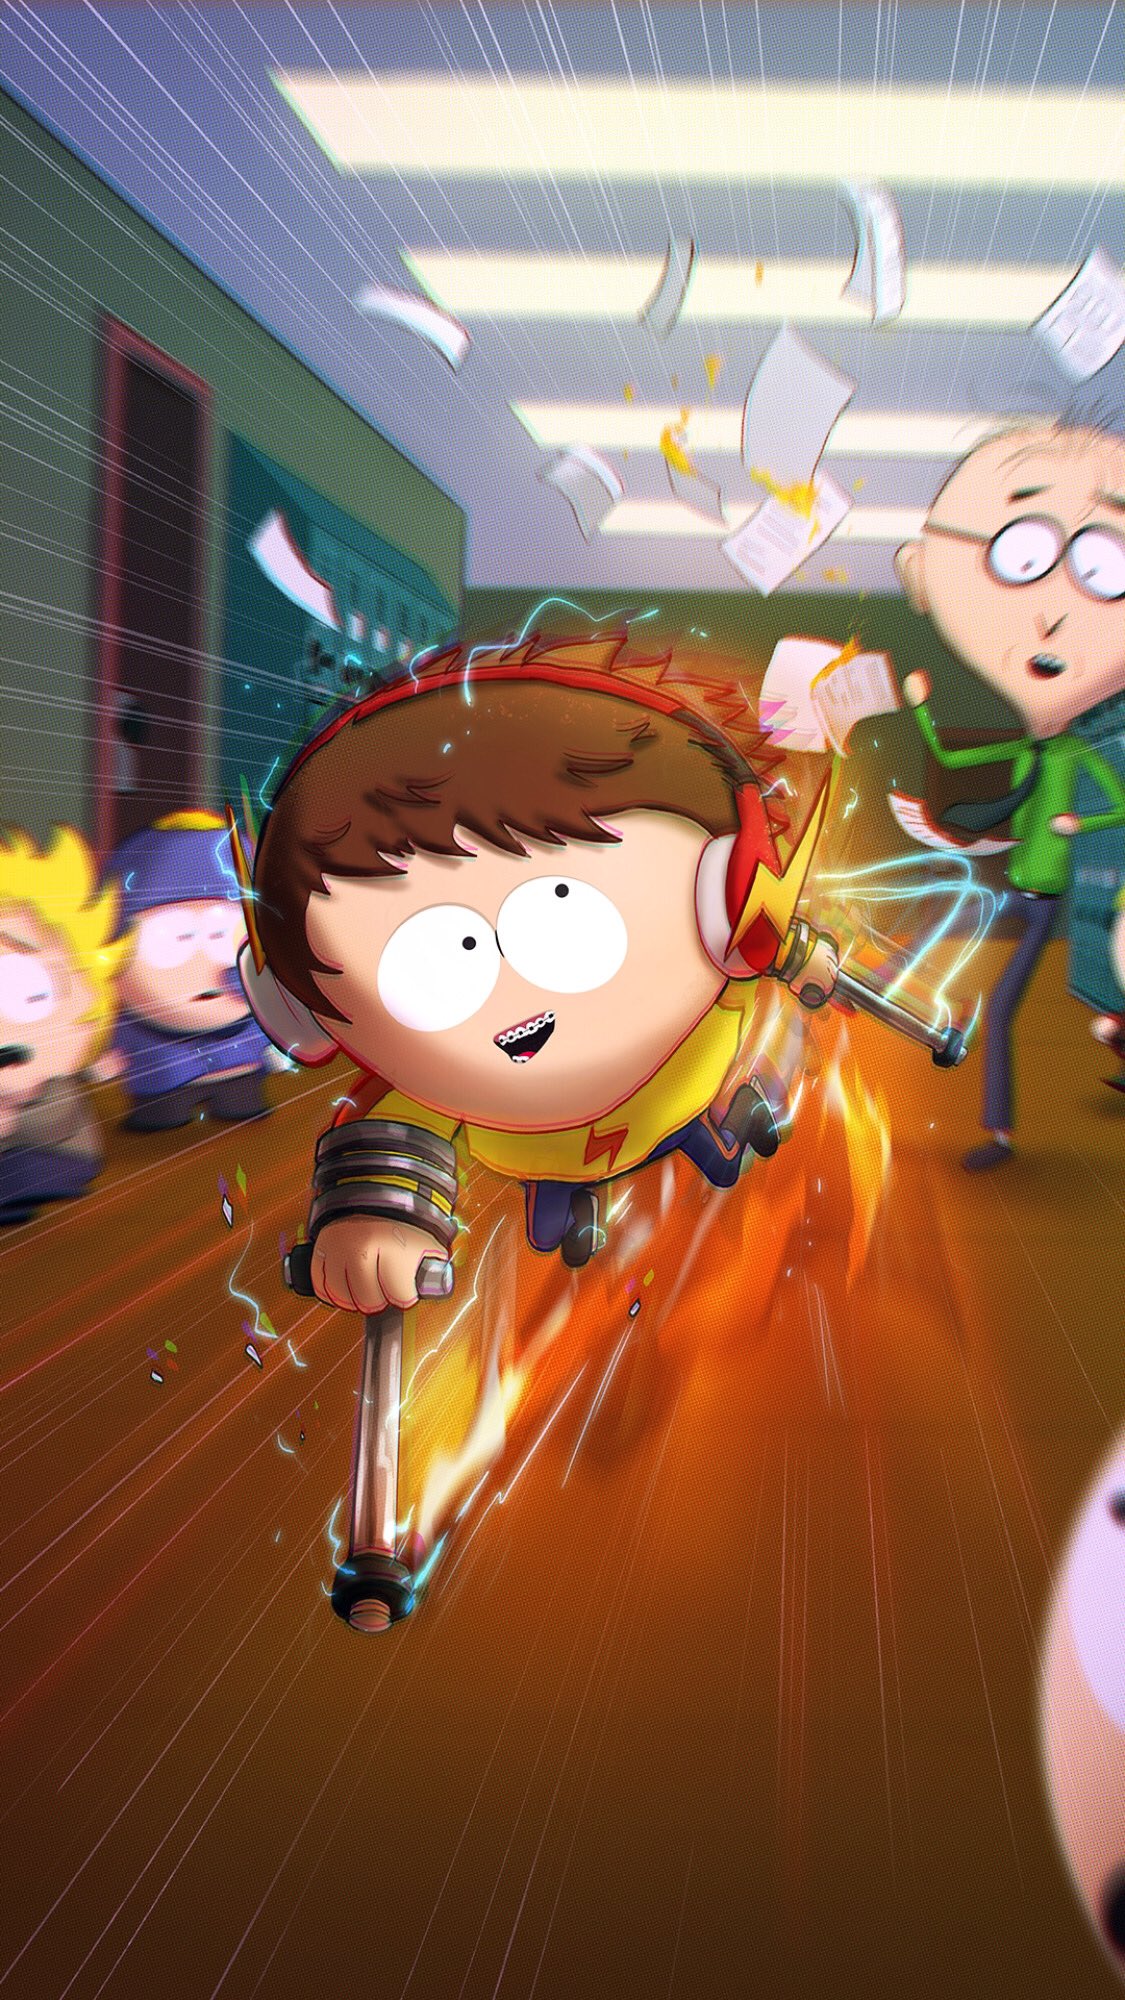 South Park: The Fractured But Whole Art